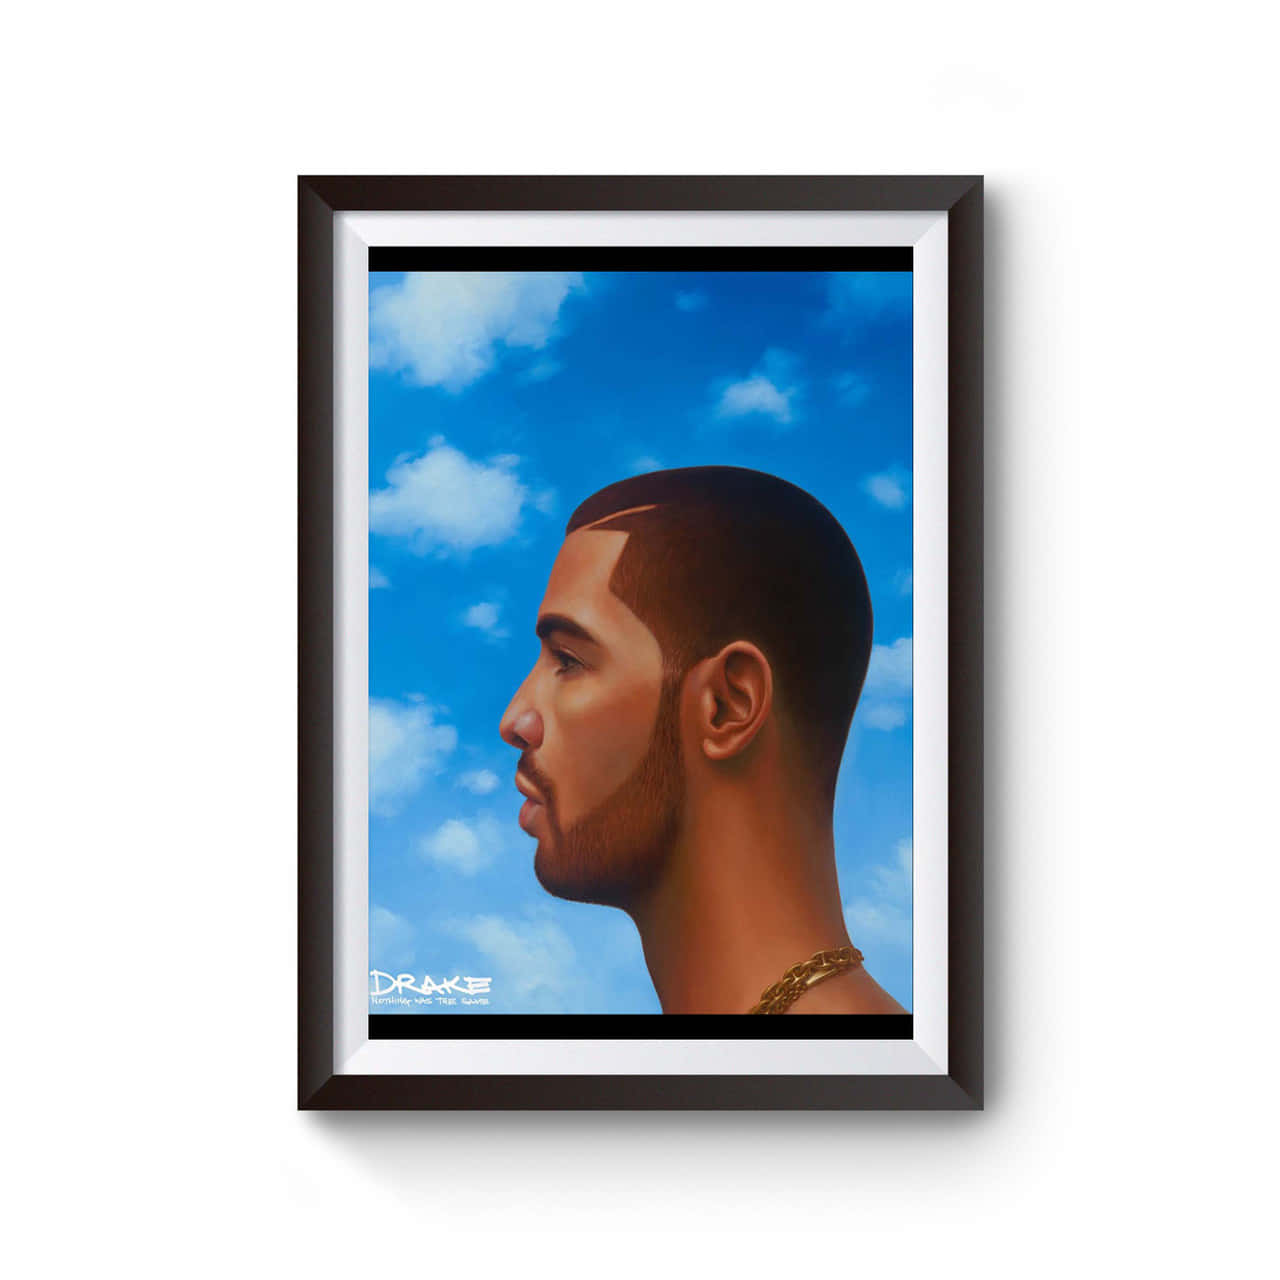 Get Inspired by Drake's Album "Nothing Was The Same" Wallpaper